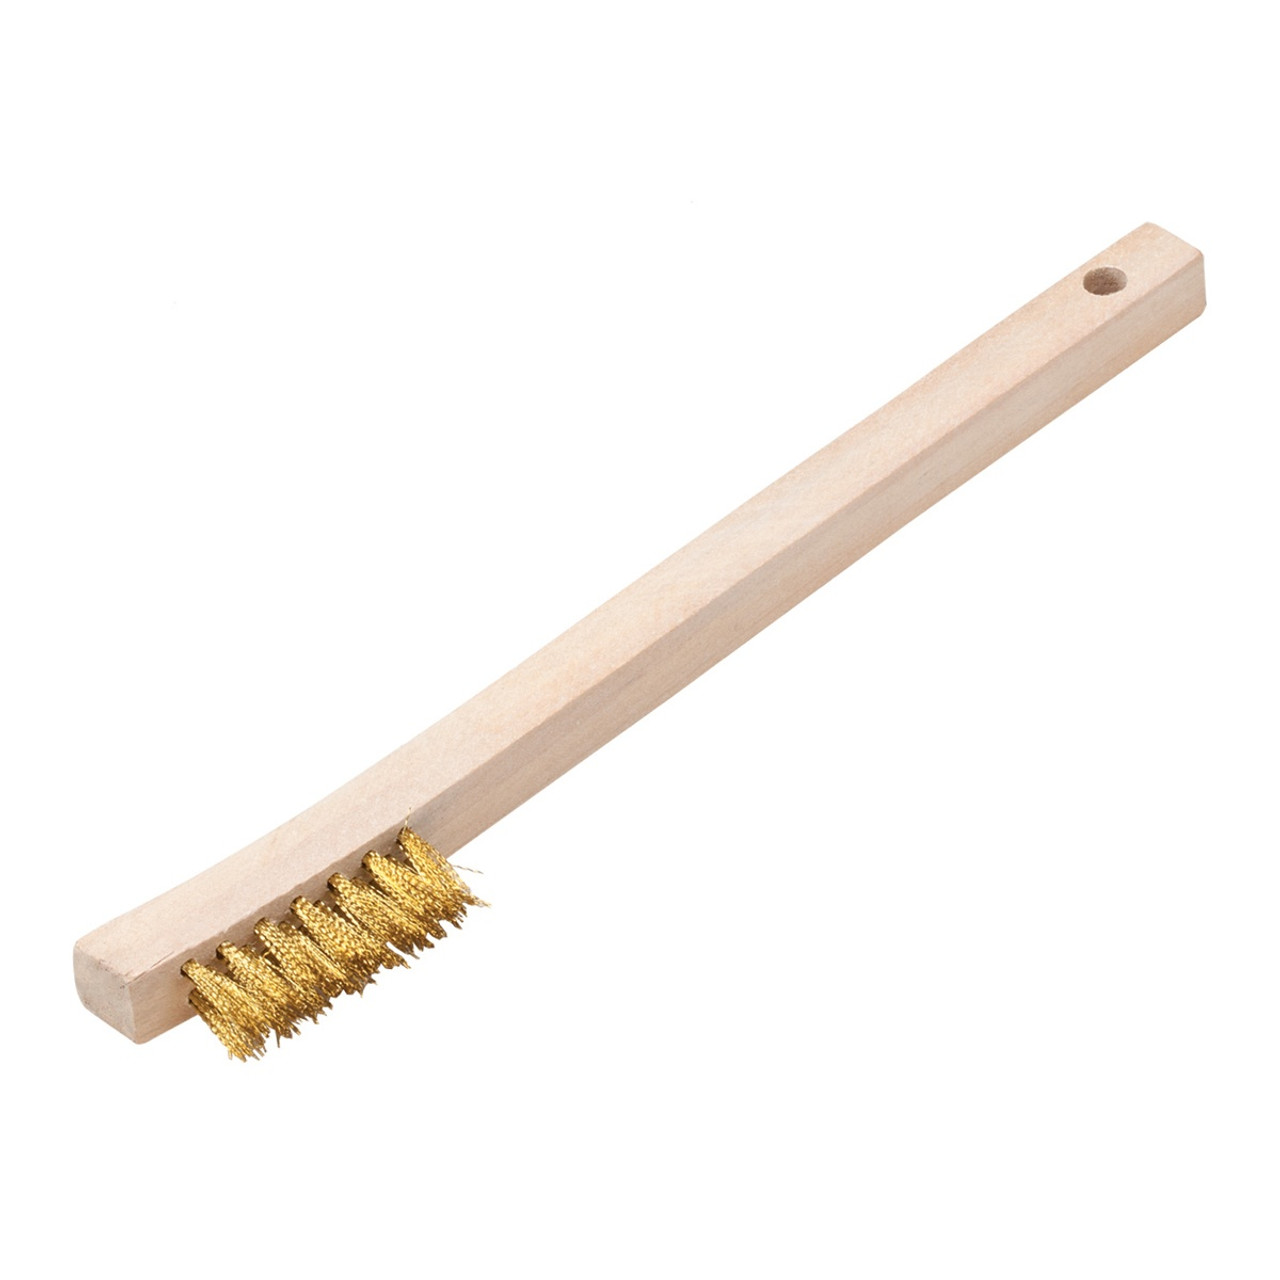 6 Inch Wood Handled Scratch Brush with Brass Bristles